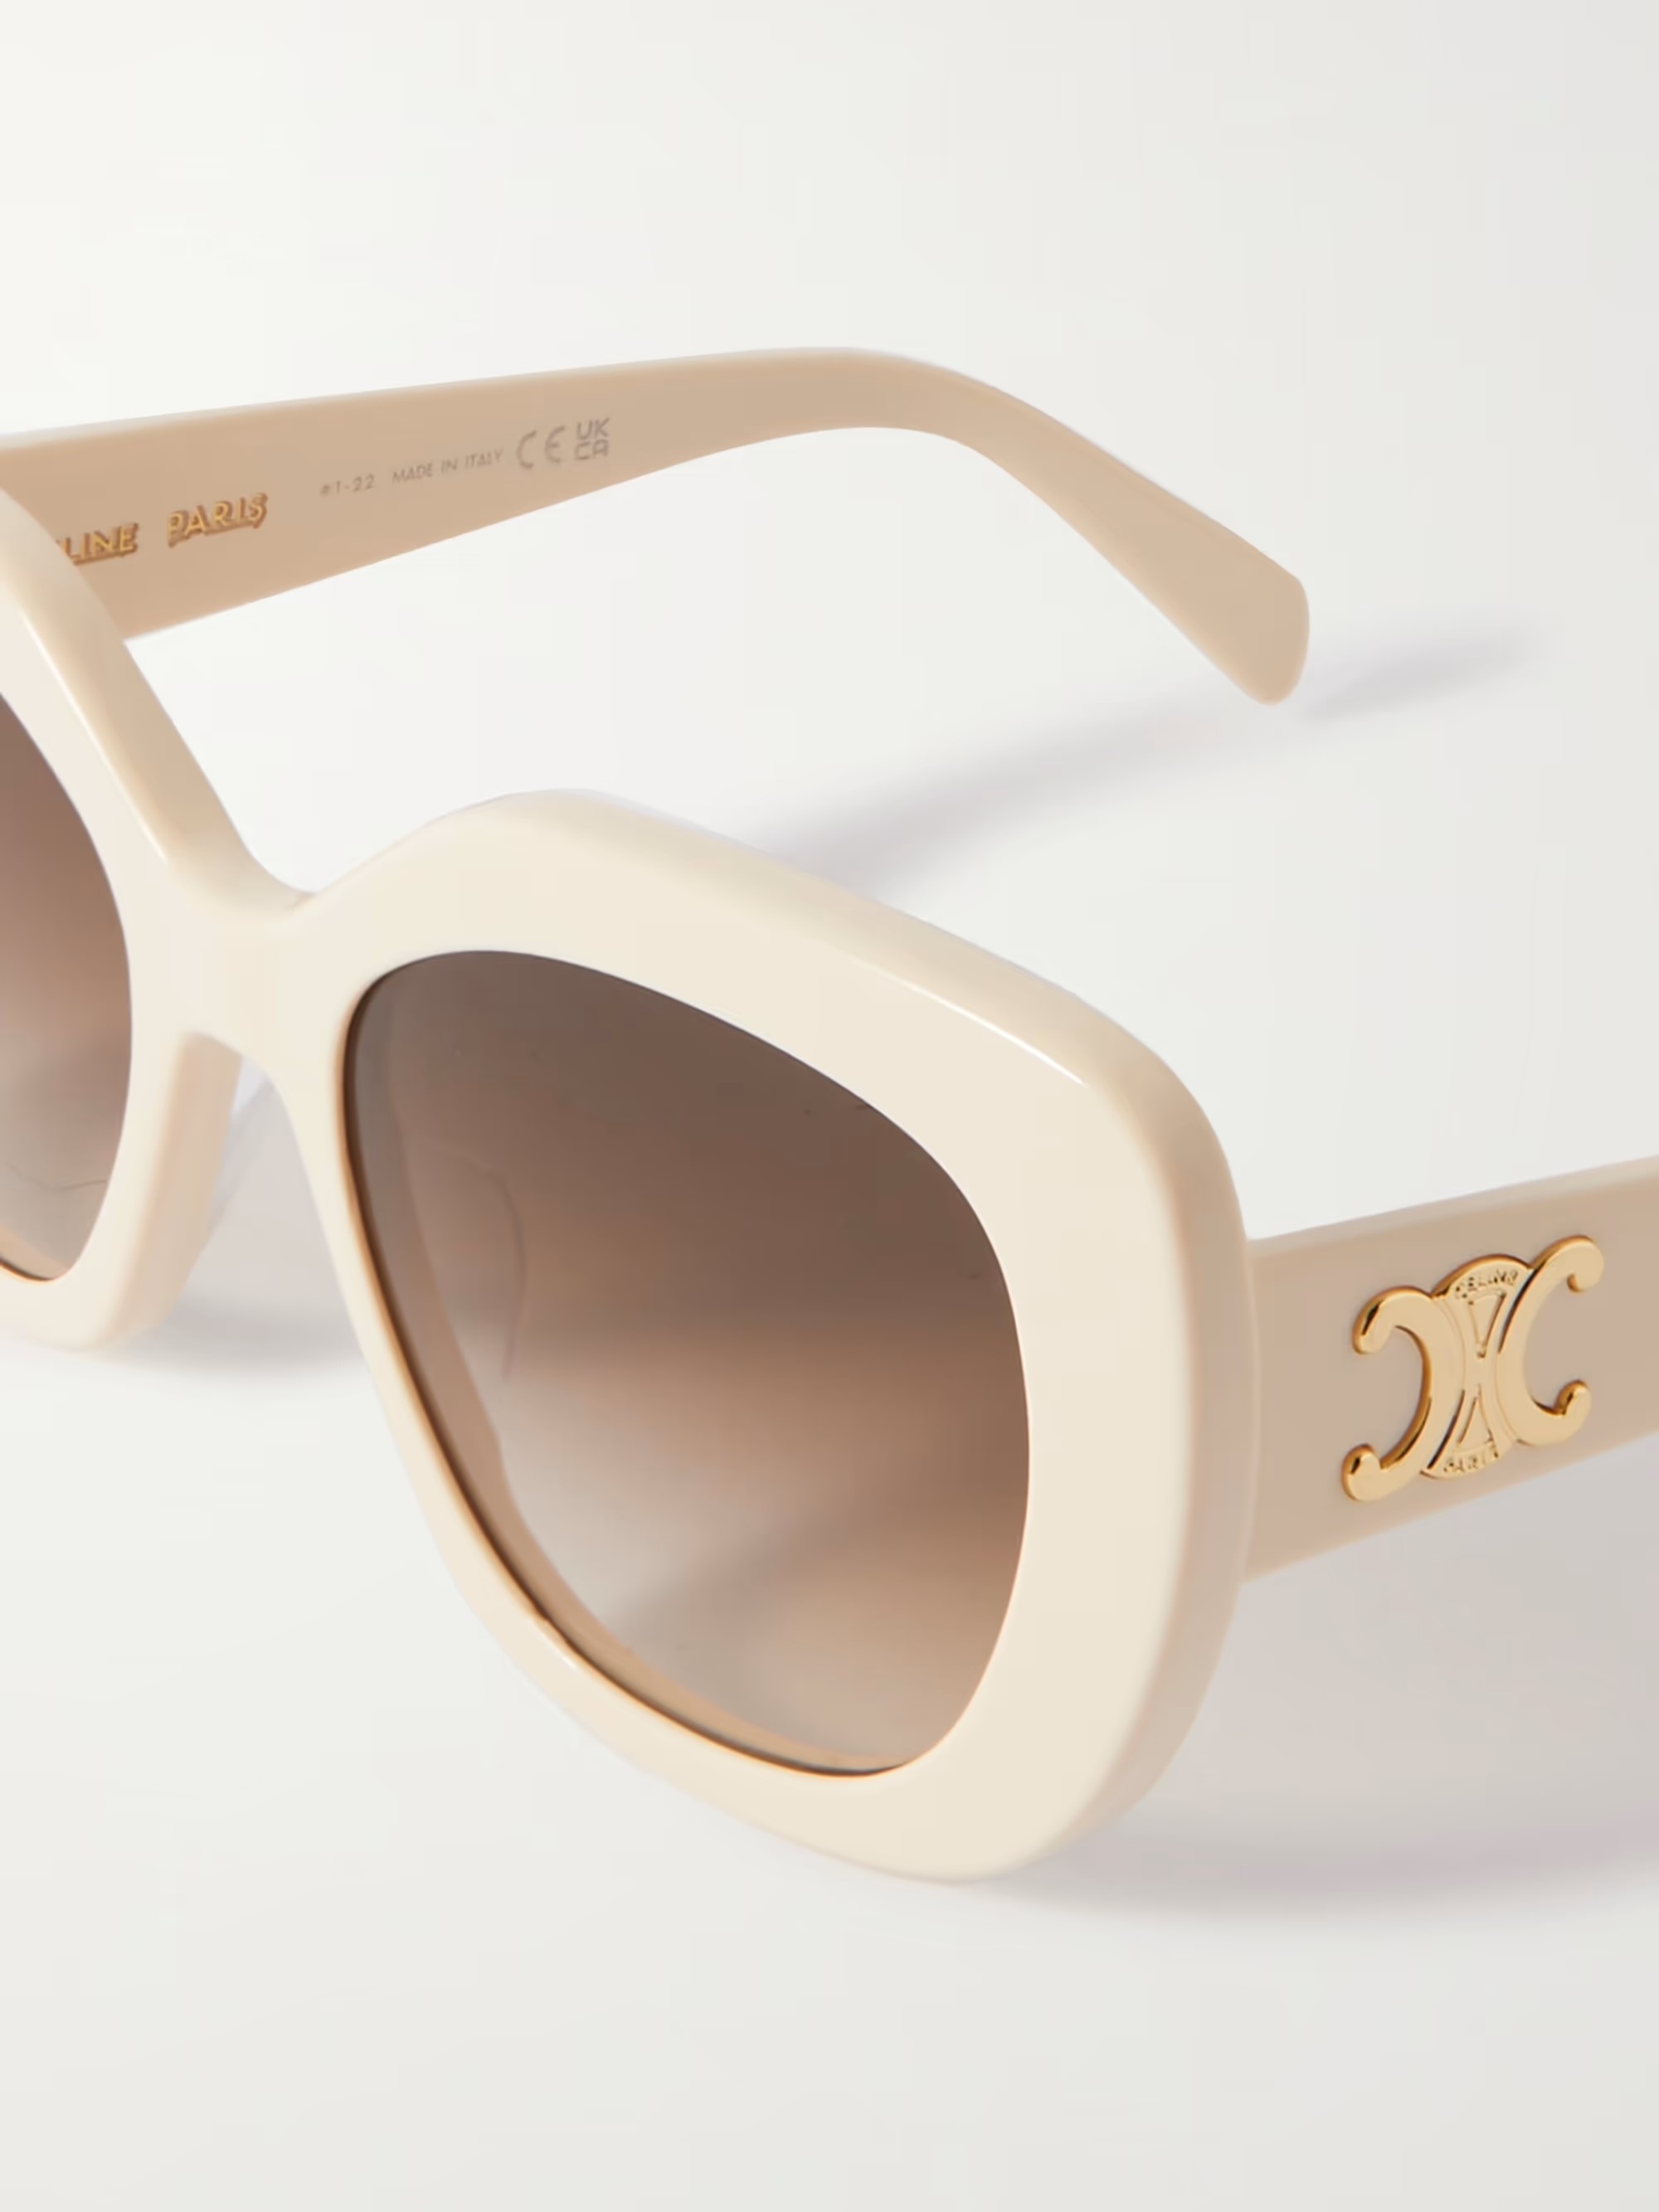 MẮT KÍNH NỮ CELINE TRIOMPHE 06 SUNGLASSES IN IVORY SQUARE ACETATE 1